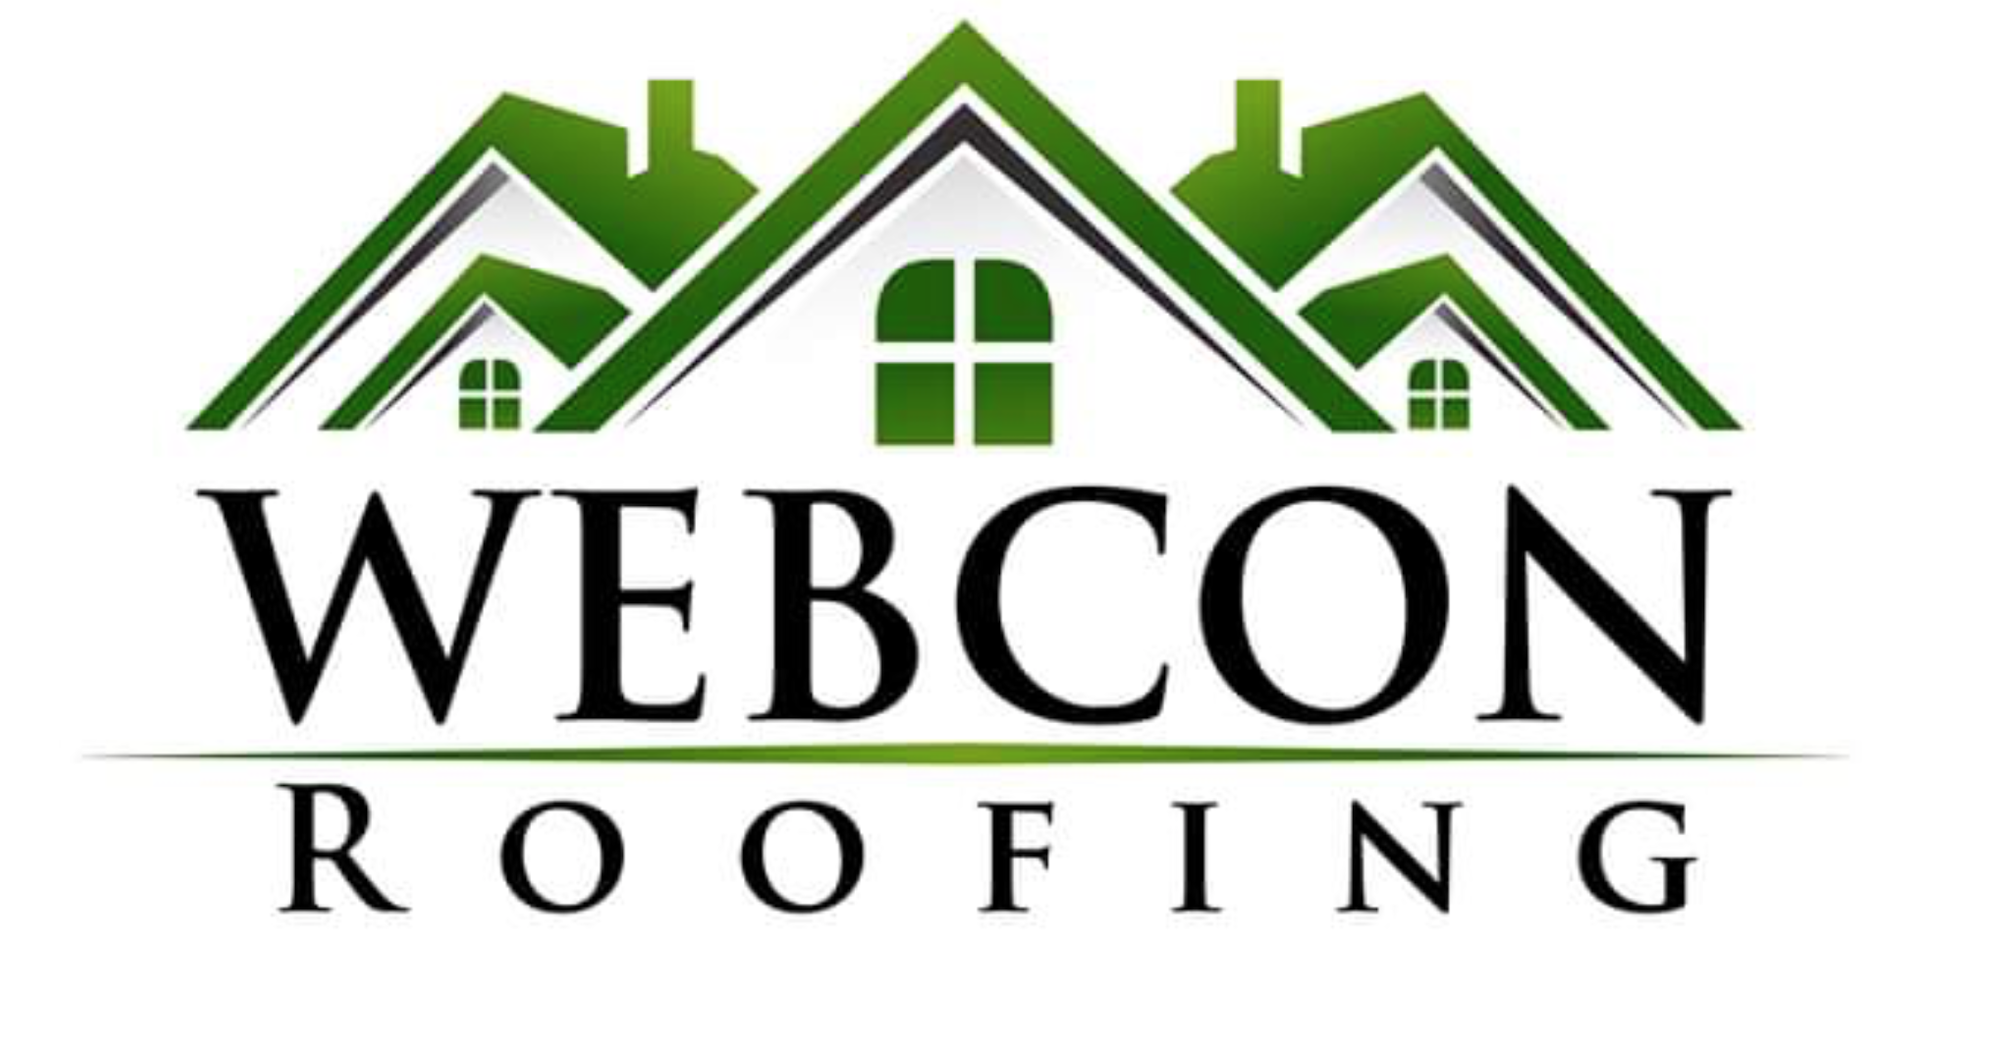 Webcon Roofing